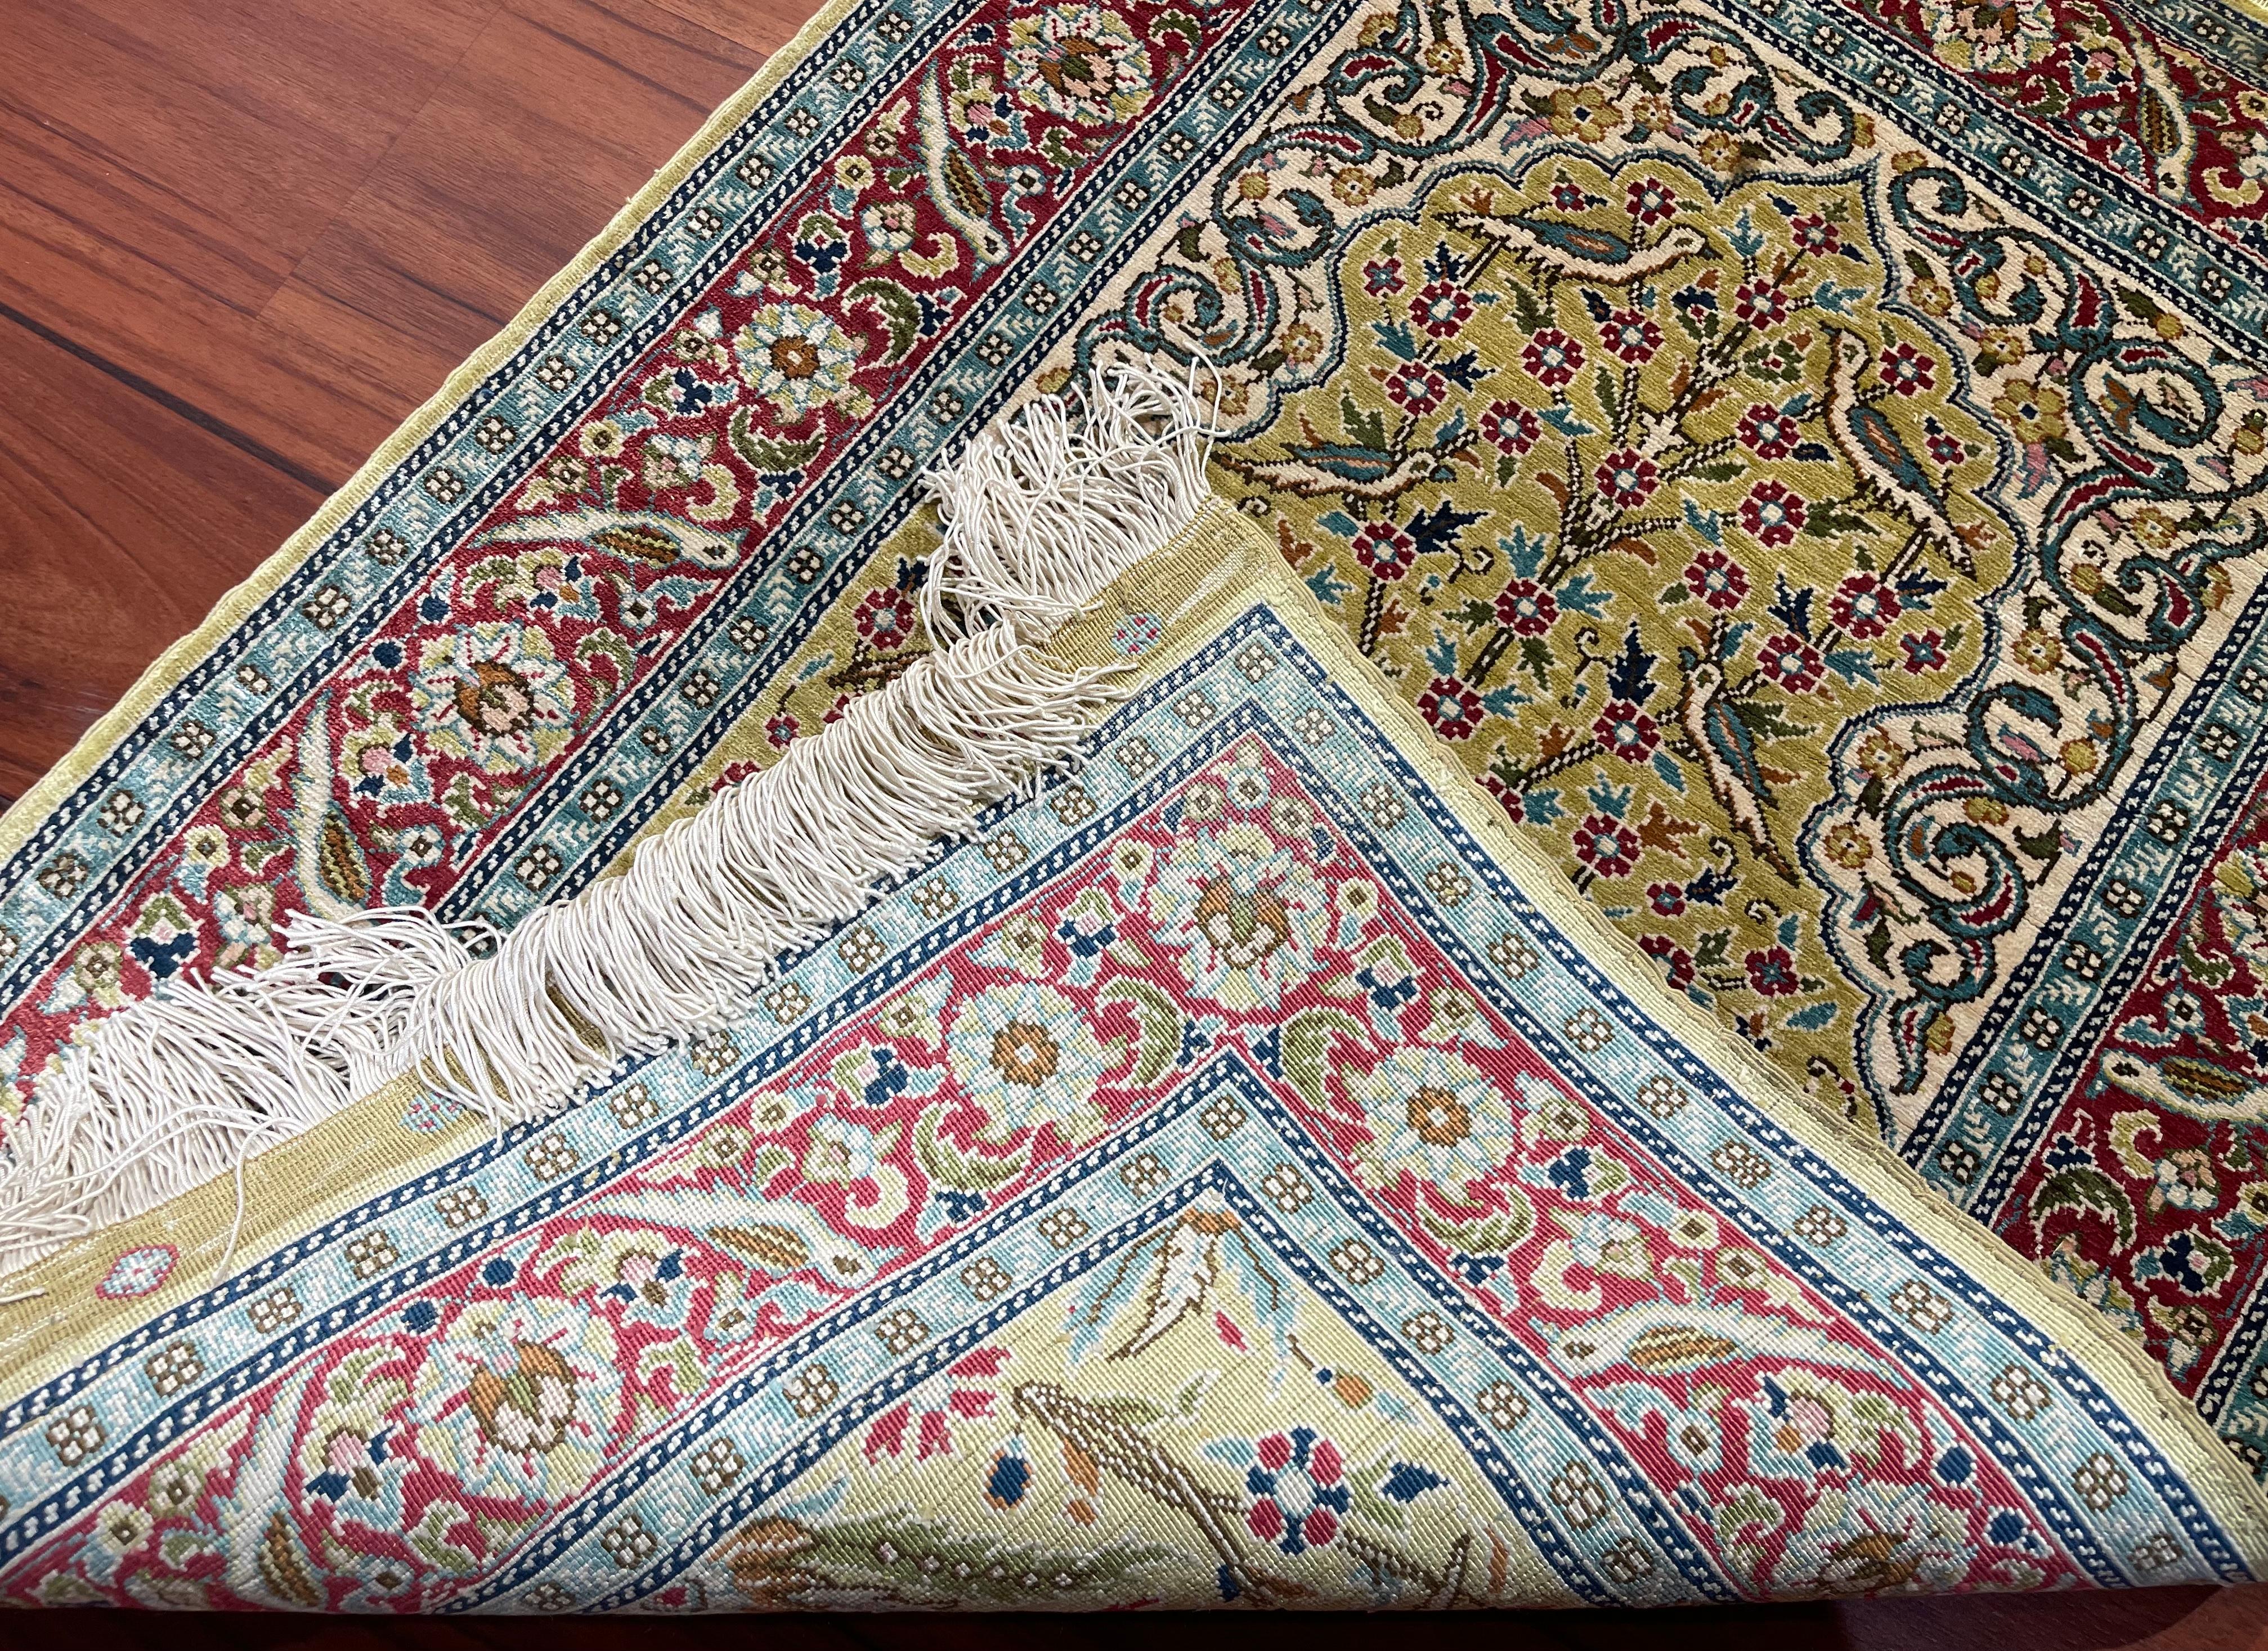 A stunning 100% silk Turkish Hereke rug that orignated from Turkey in the late 20th century. This piece is fully hand-knotted and is in excellent condition. Feel free to message me regarding this item or any other listed on my page!